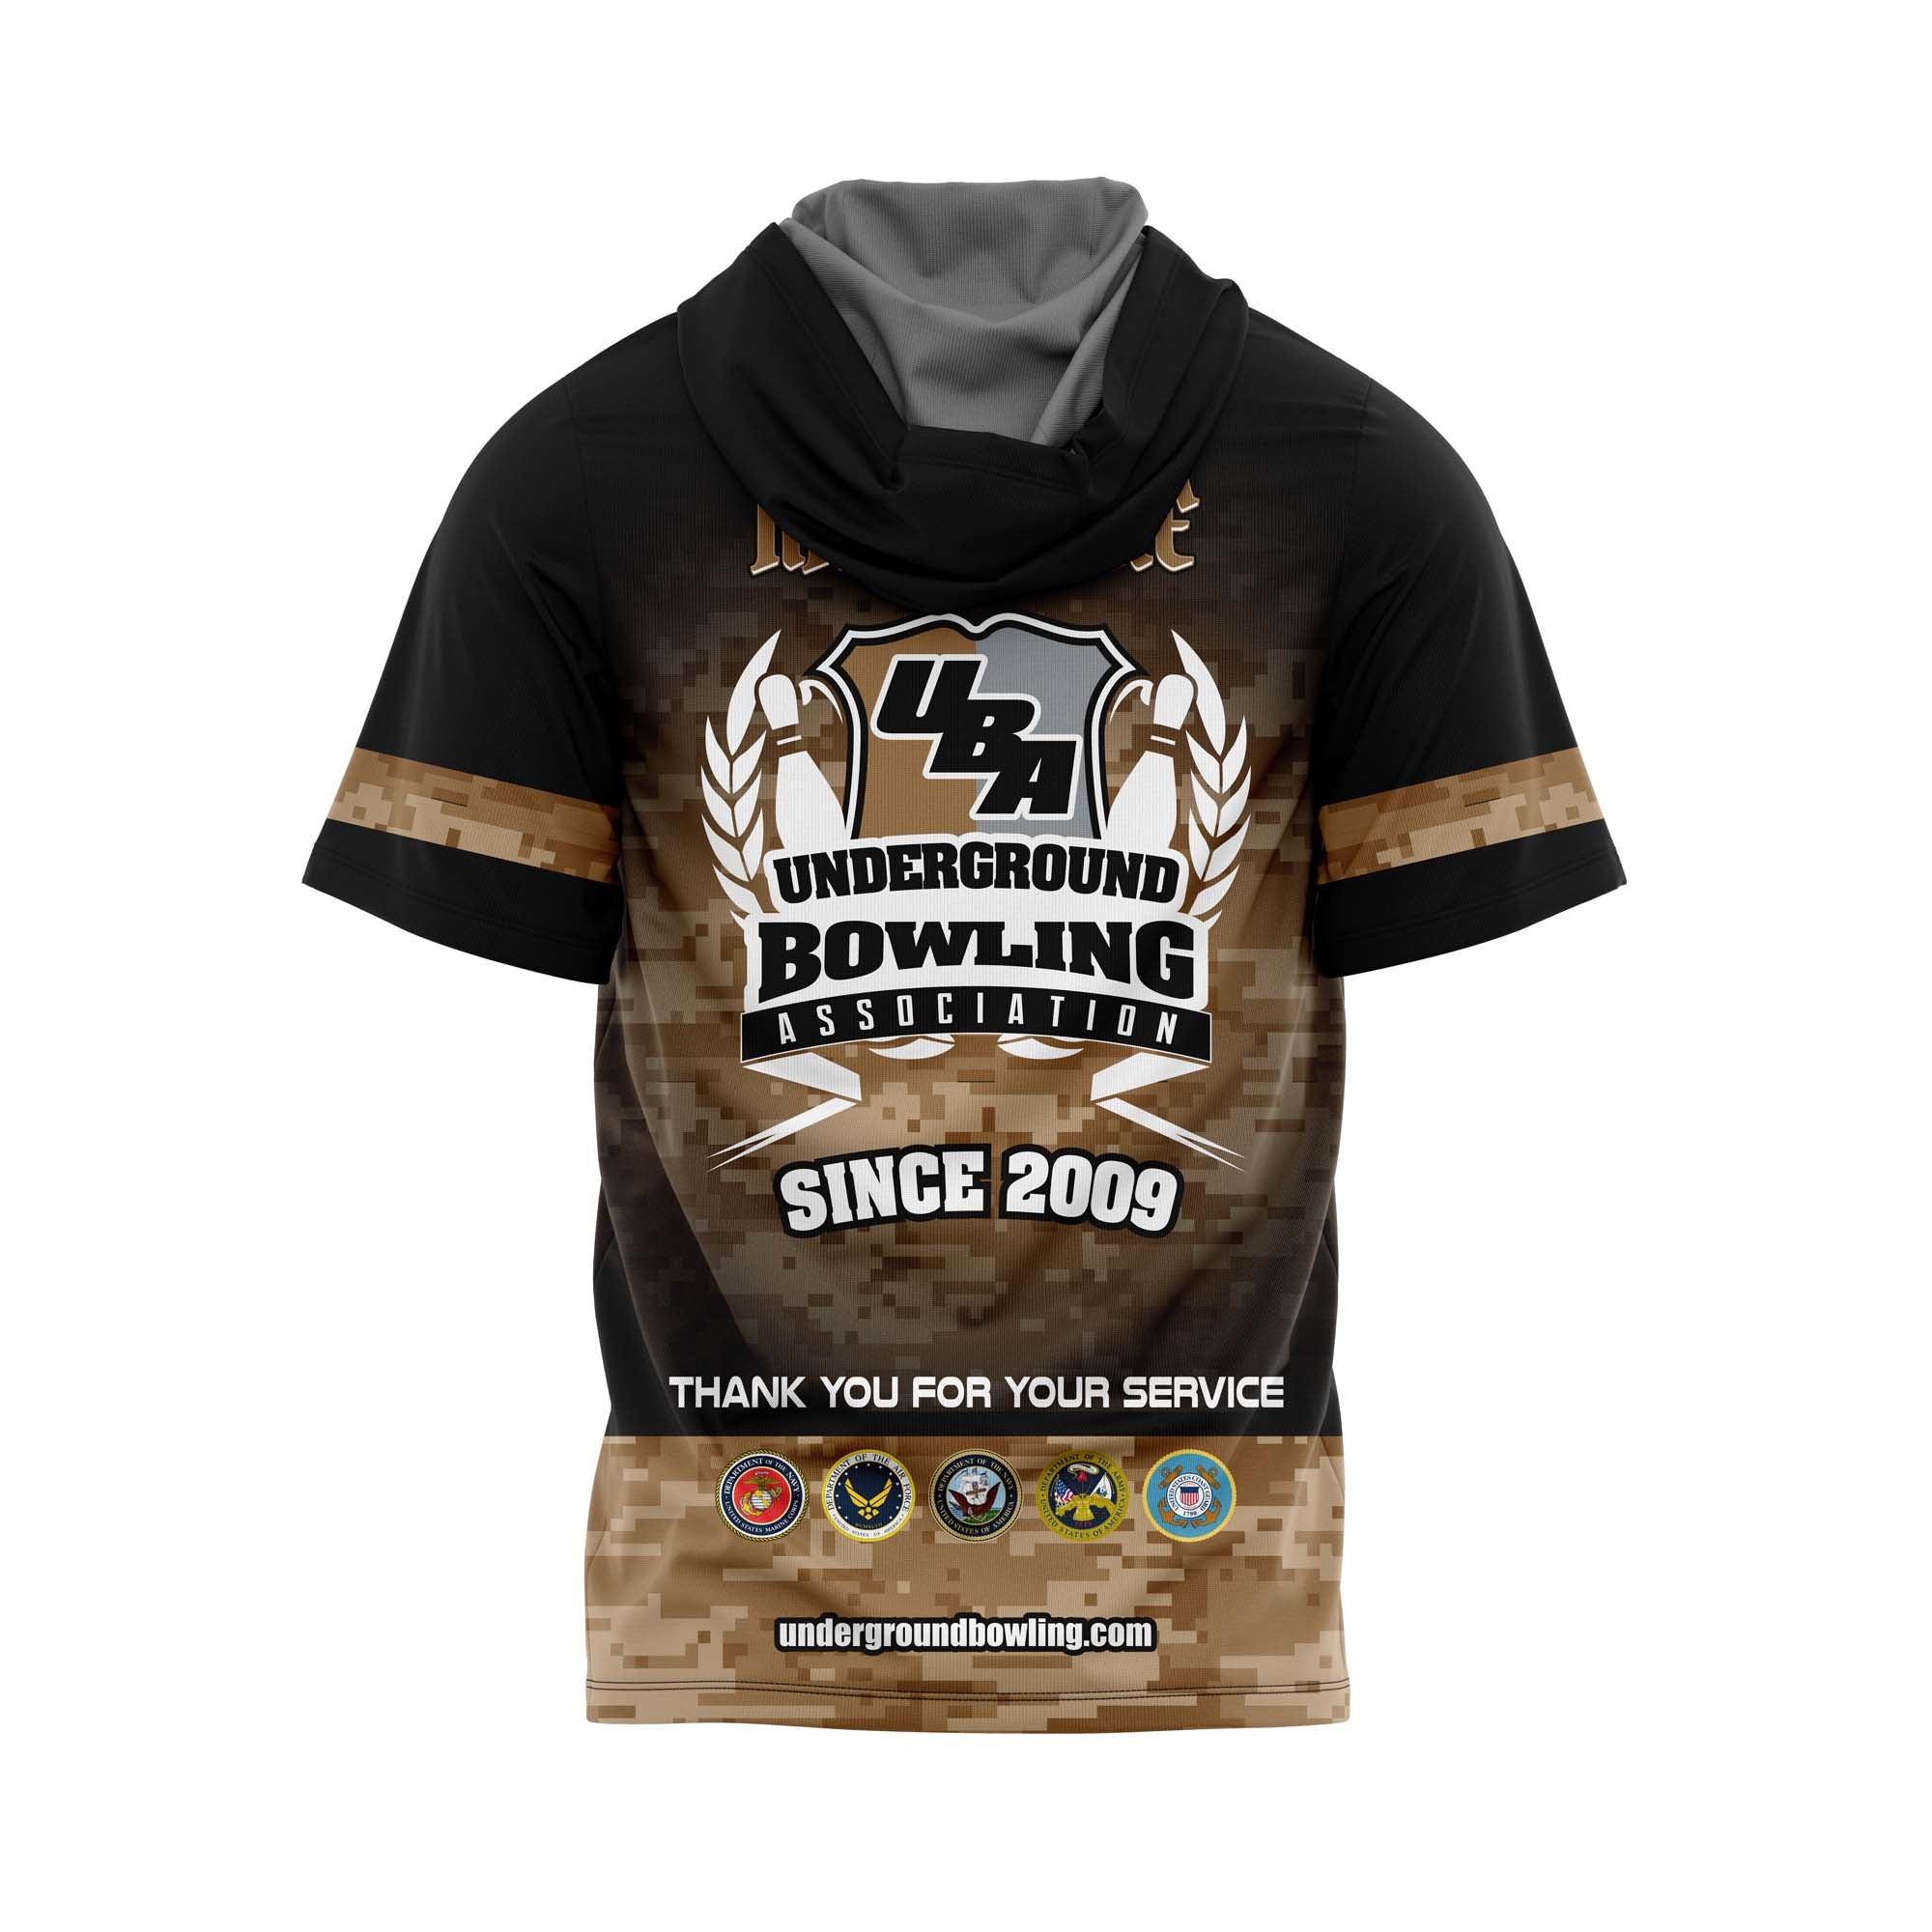 The Disciples Military Jerseys